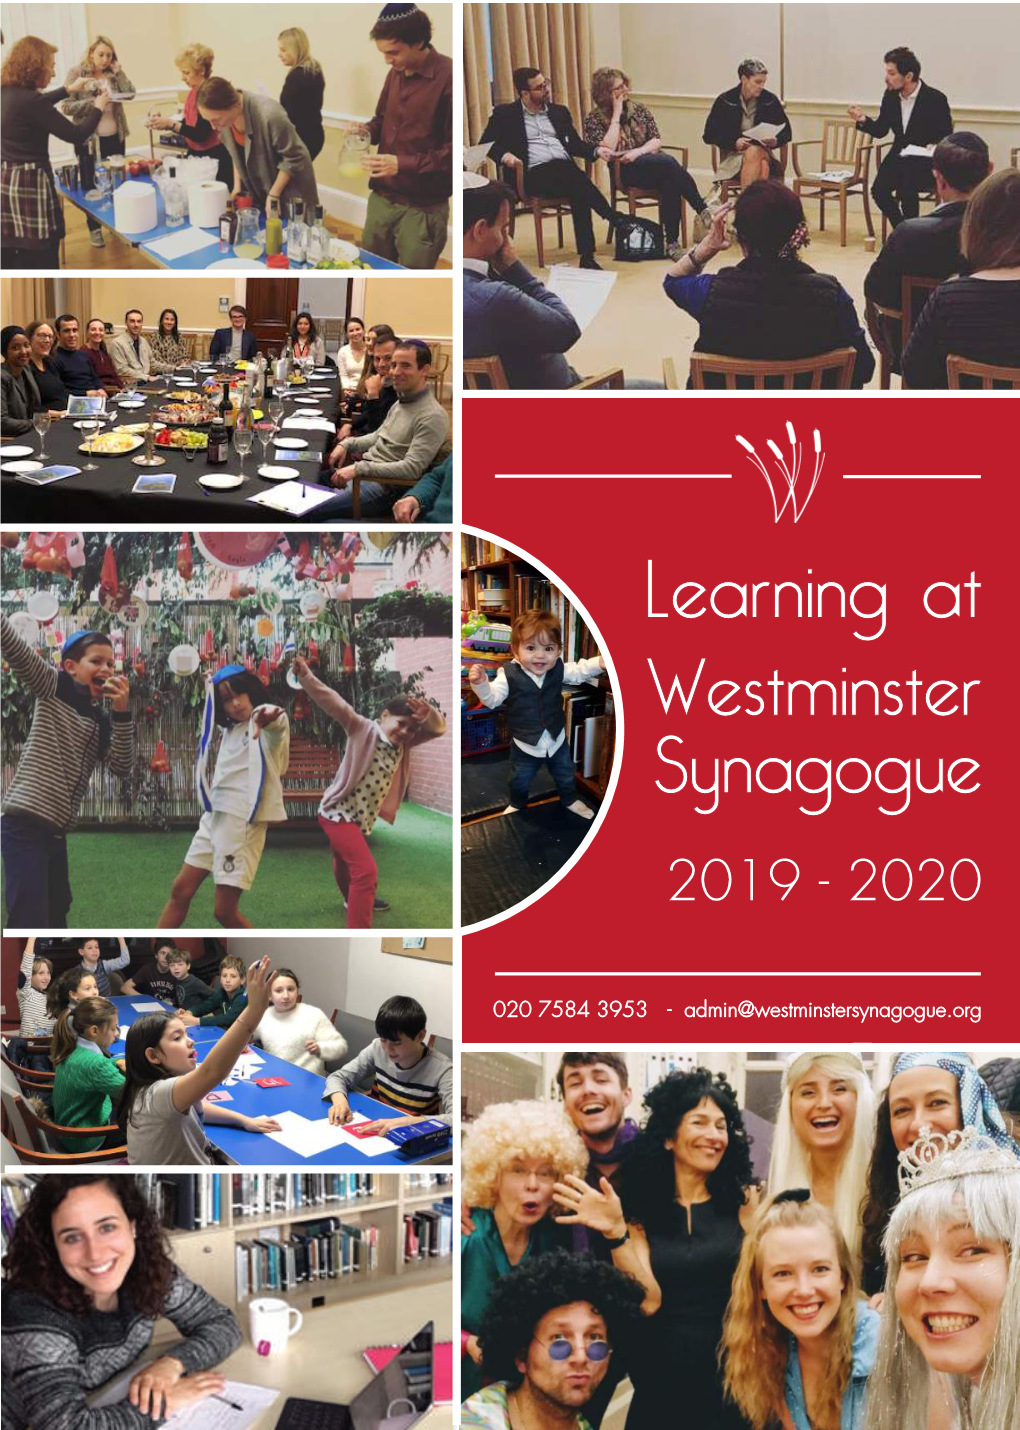 Learning at Westminster Synagogue 2019 - 2020